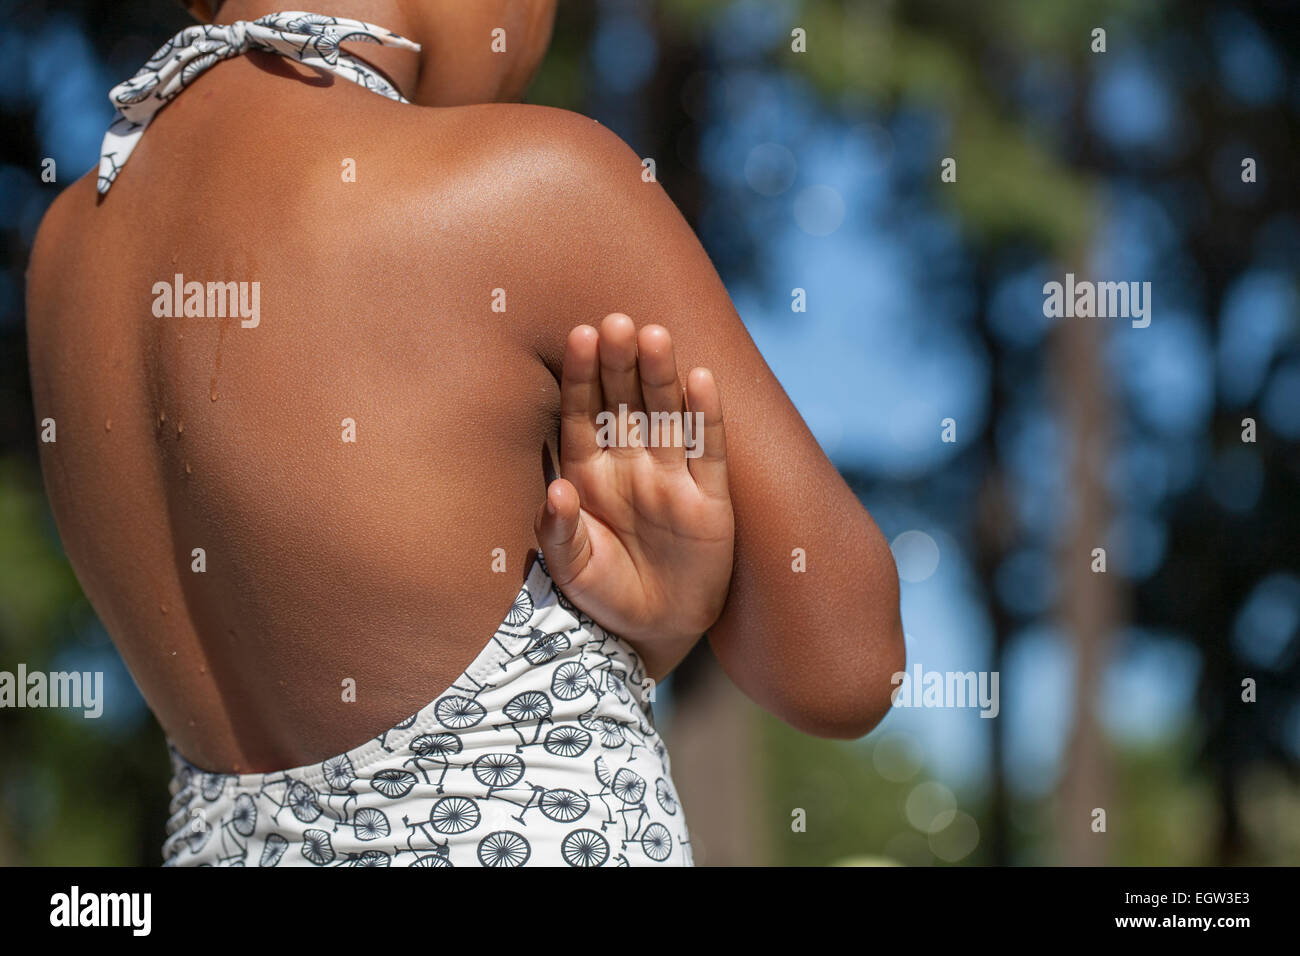 Girl crossing her arms in a bathing suit. Stock Photo